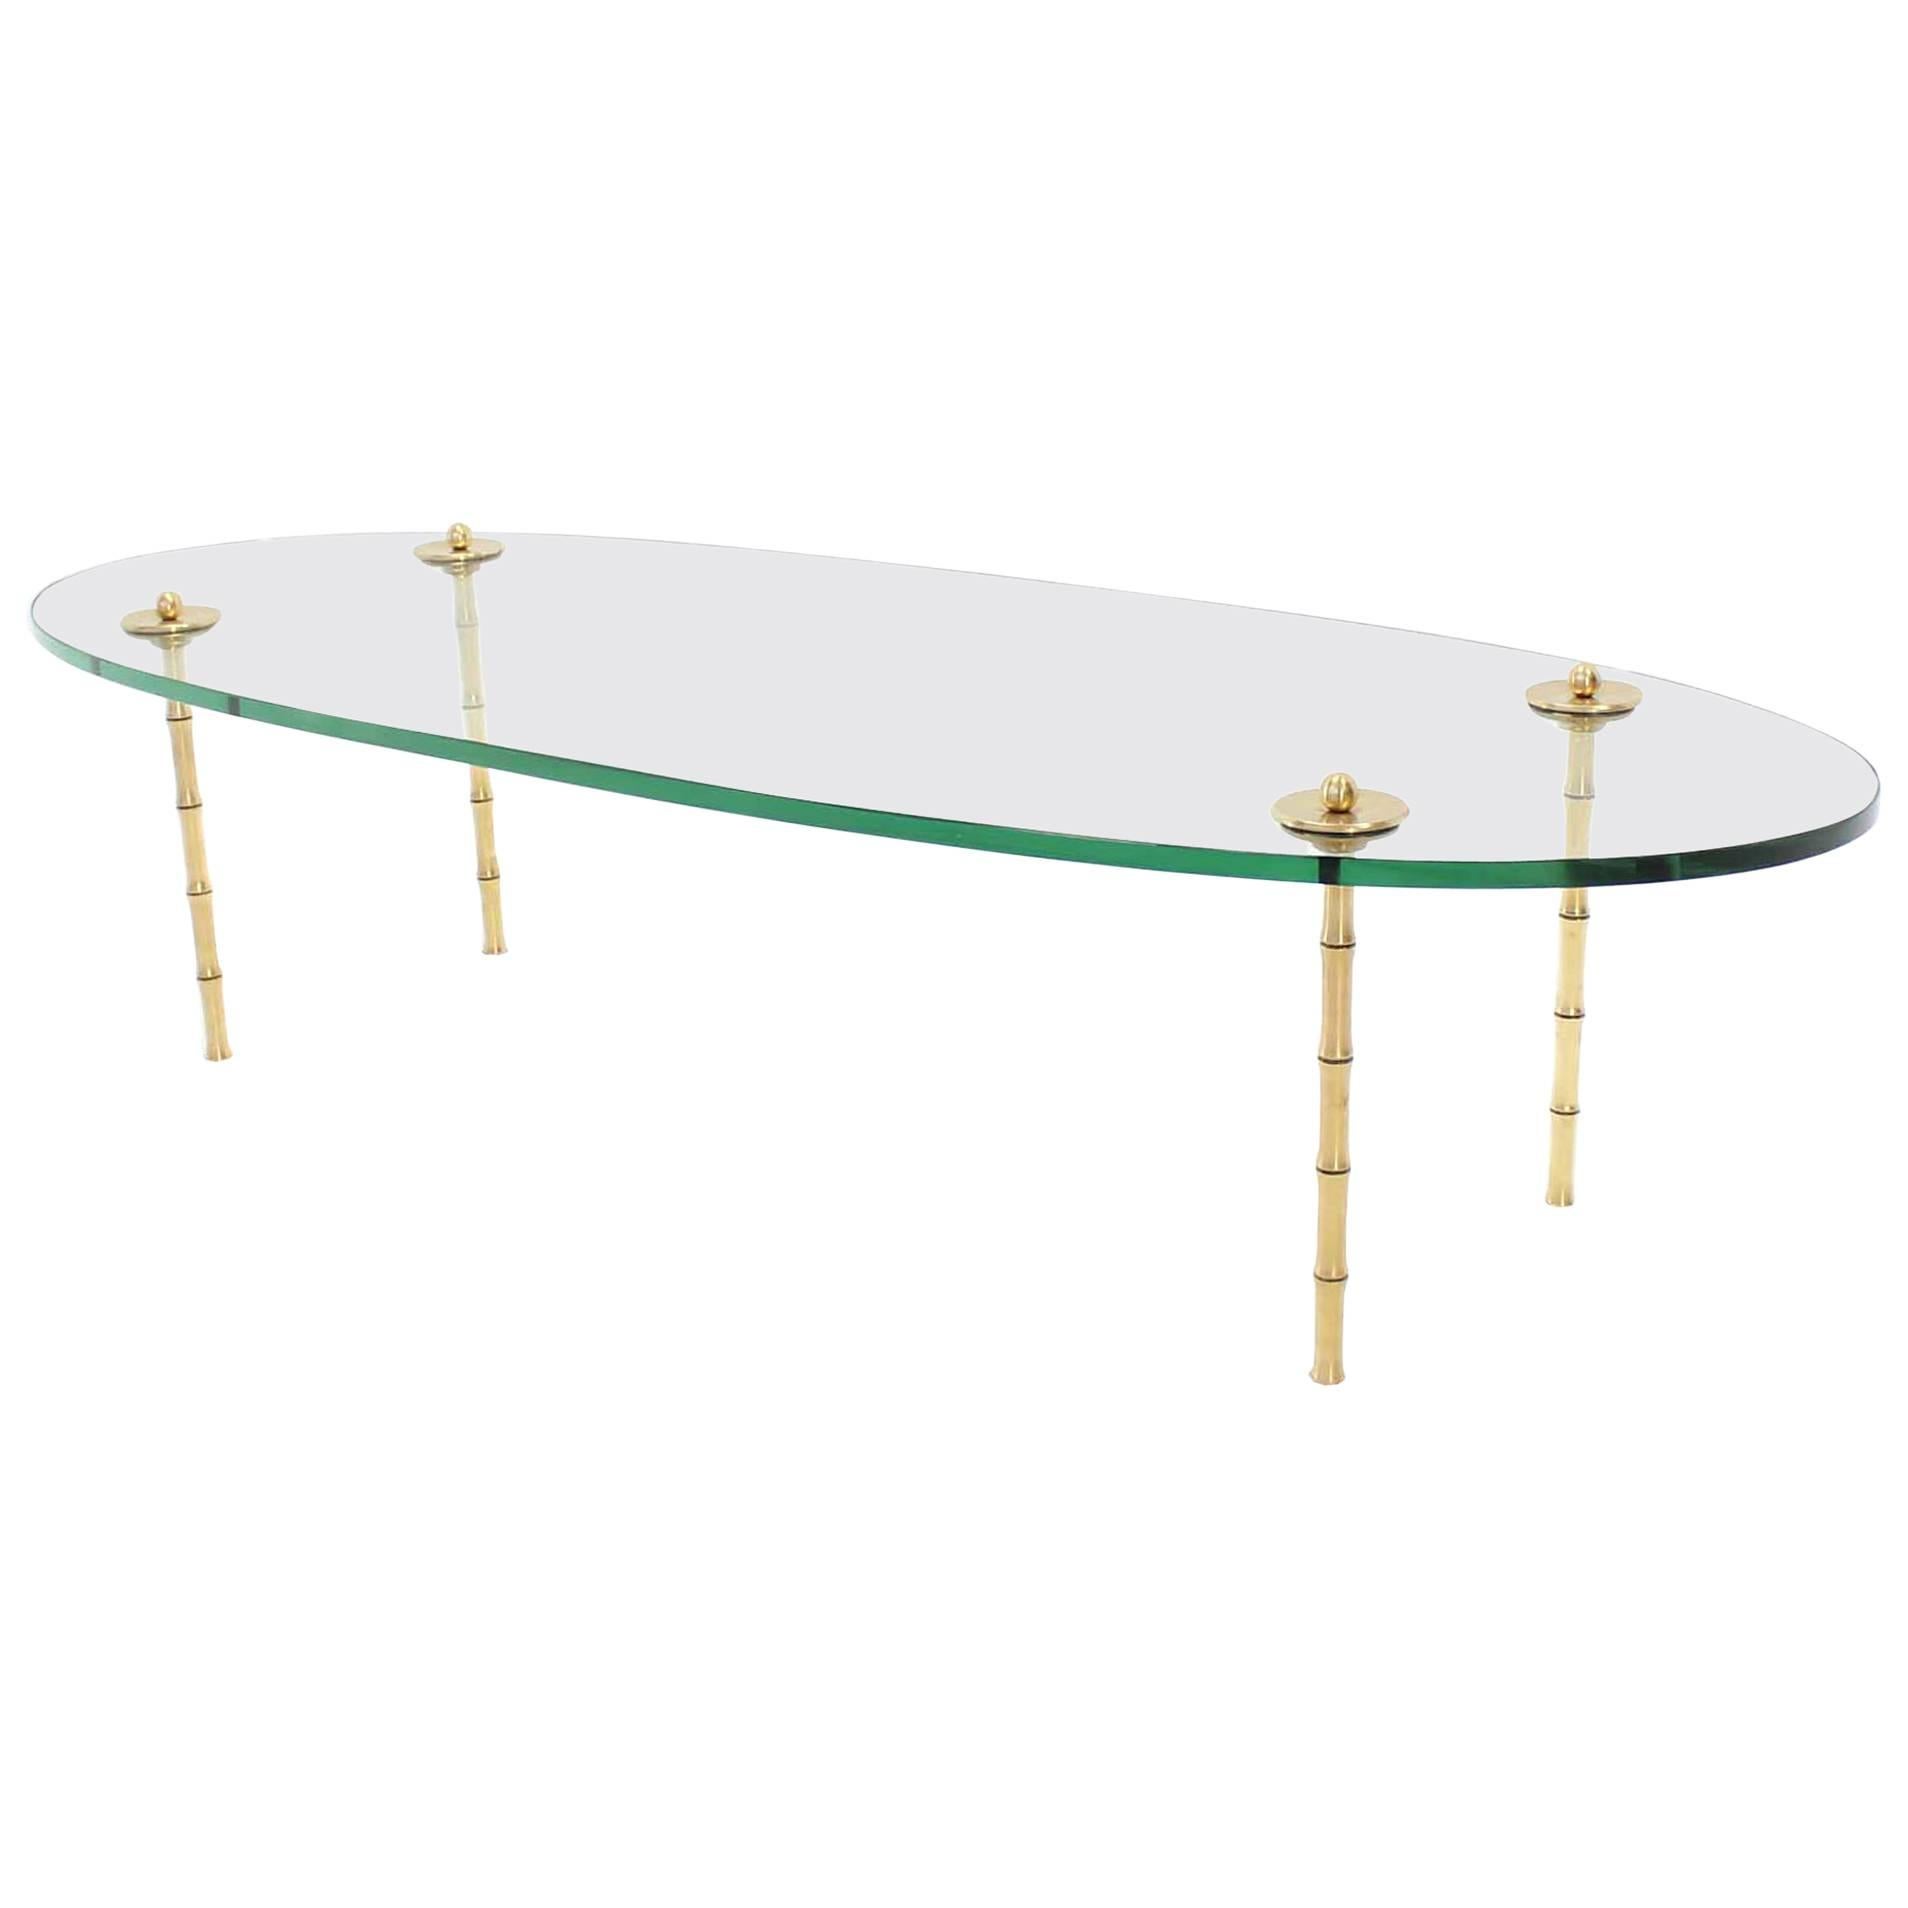 Turned Brass Faux Bamboo Legs Thick Glass Top Oval Coffee Table